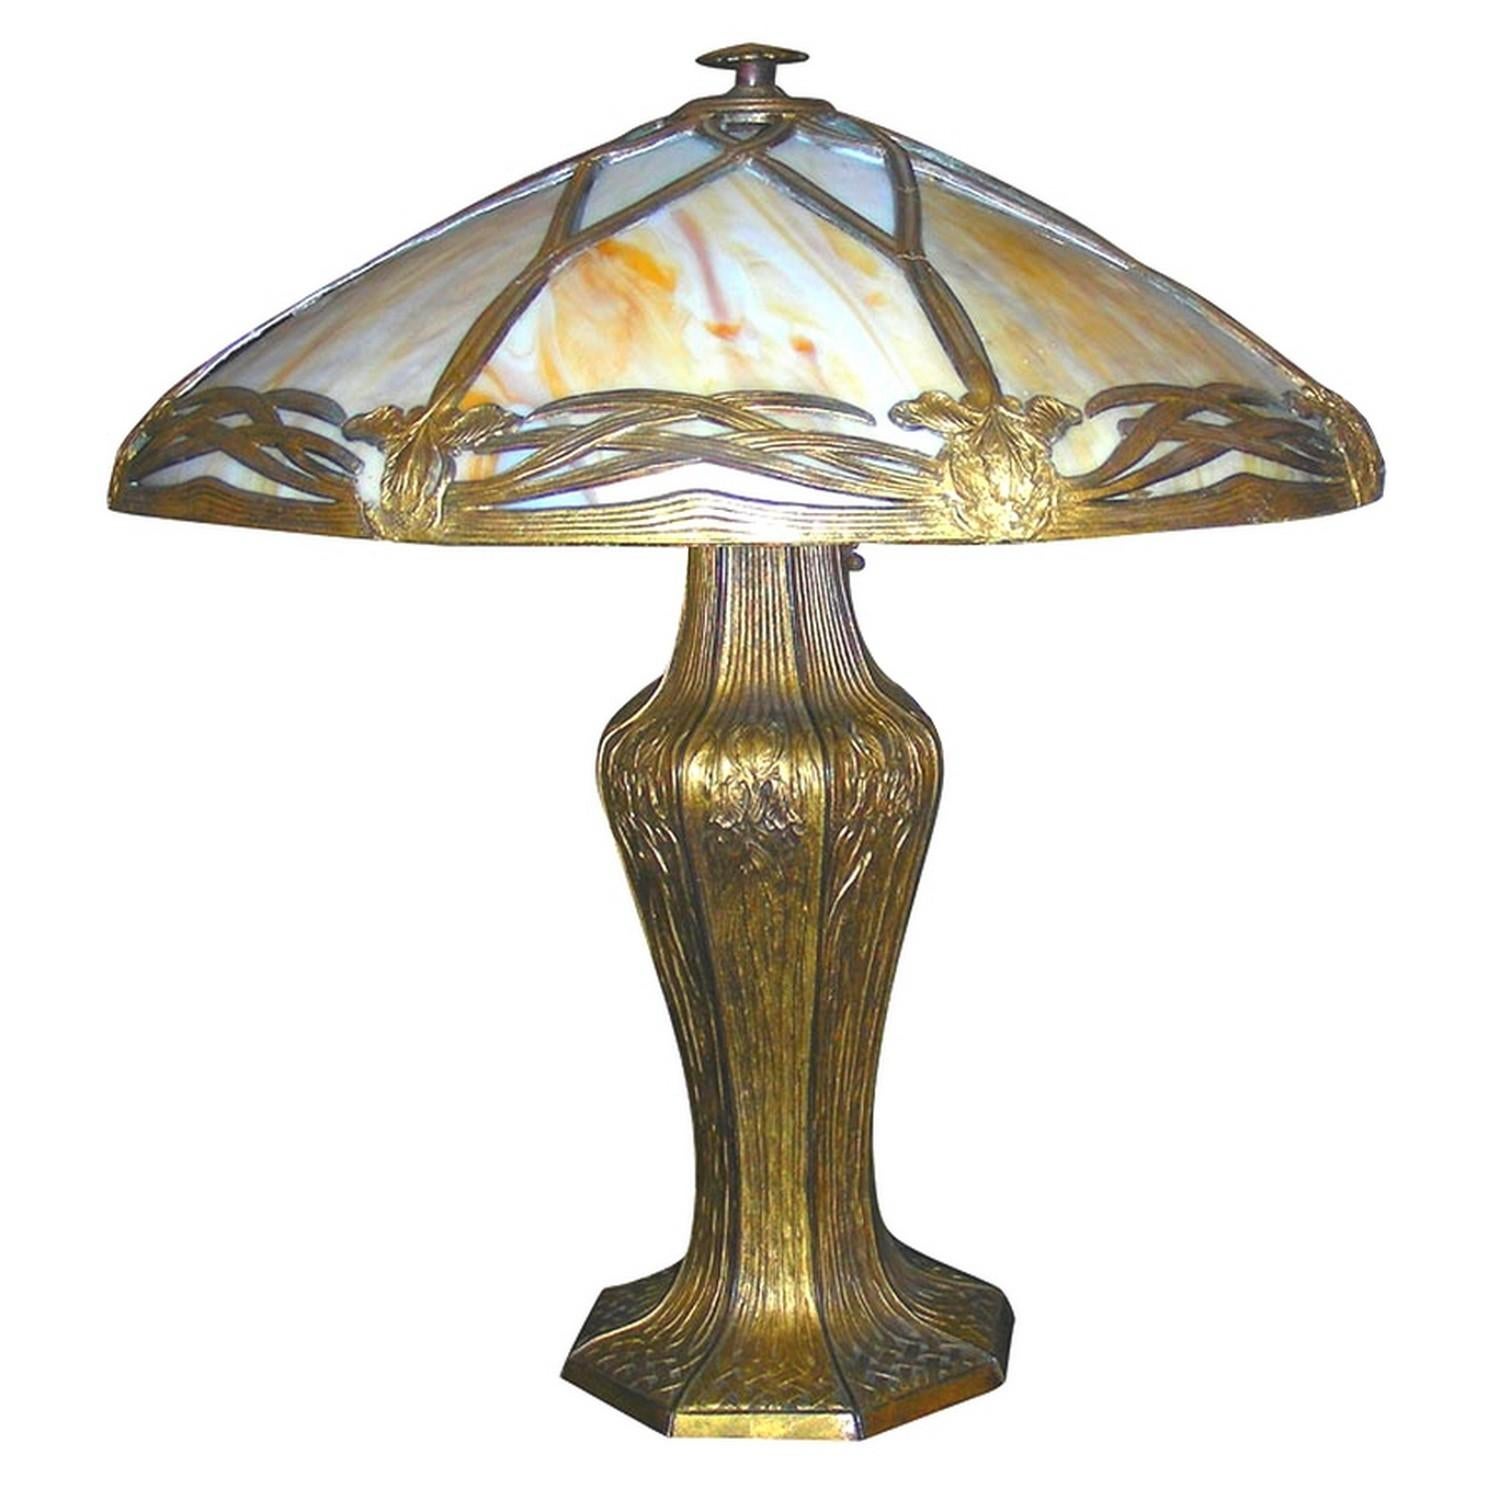 Bradley & Hubbard Arts & Crafts table lamp.

Lampshade with a rebated metal frame with iris decoration and curved slag glass panels.
It's stamped Bradley and Hubbard under the base of the lamp.
Beautiful colors when it is turned on and